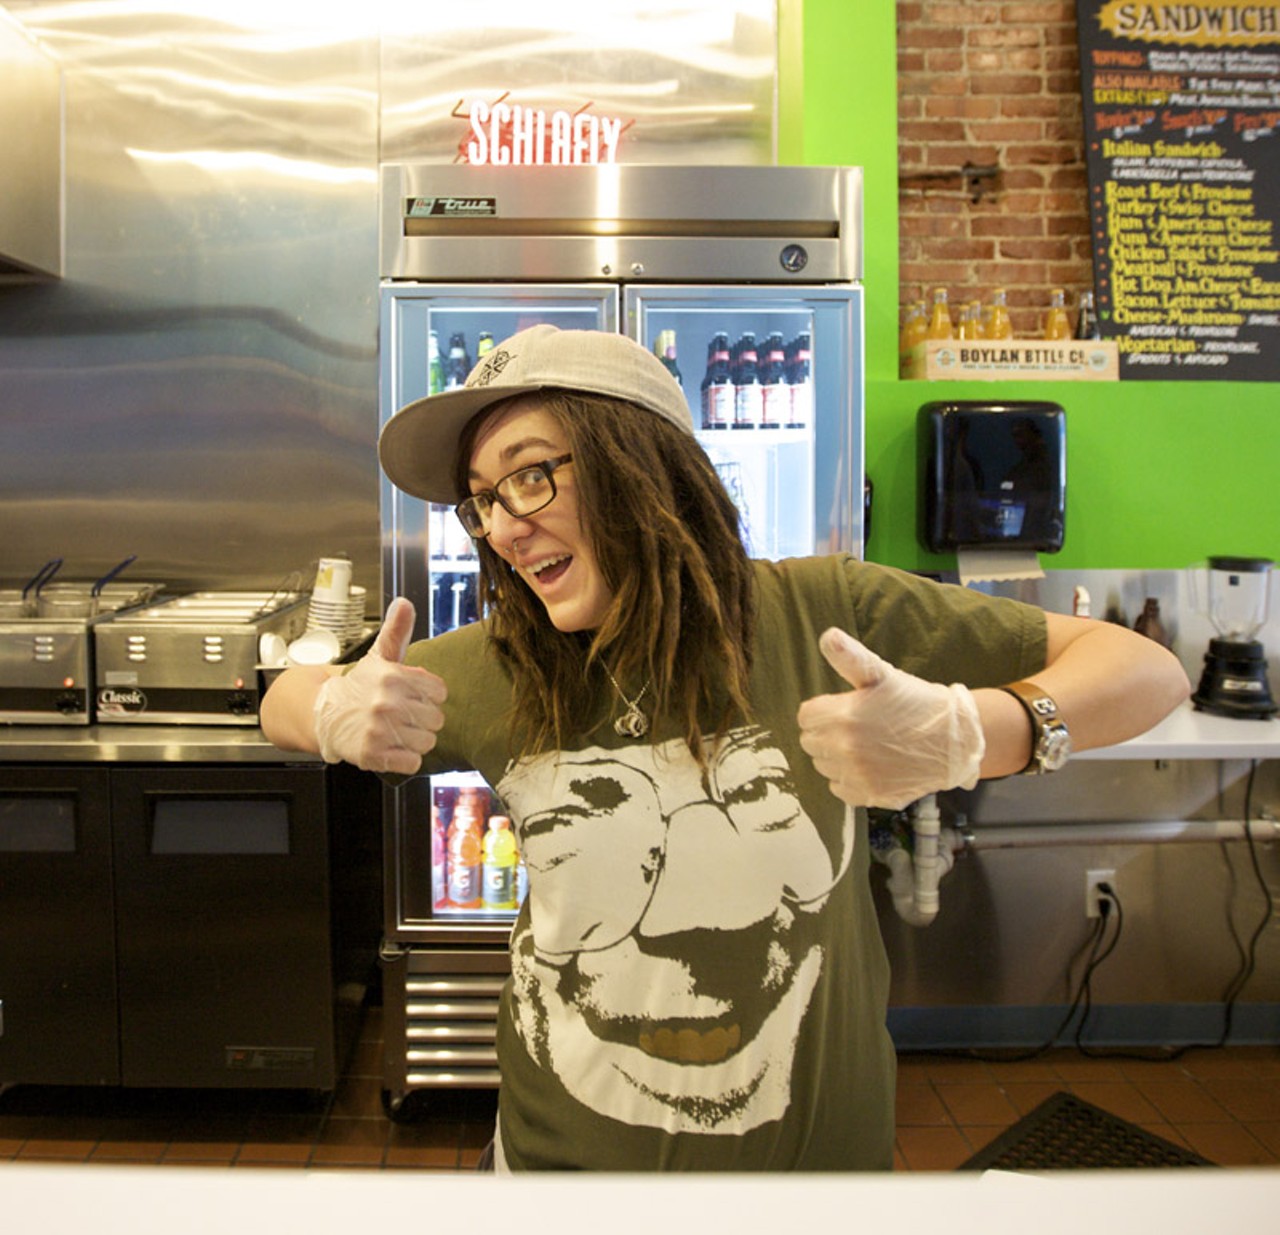 The fun vibe at Snarf's comes not only from the vibrant colored walls, but from staff like Courtney Boudreau.